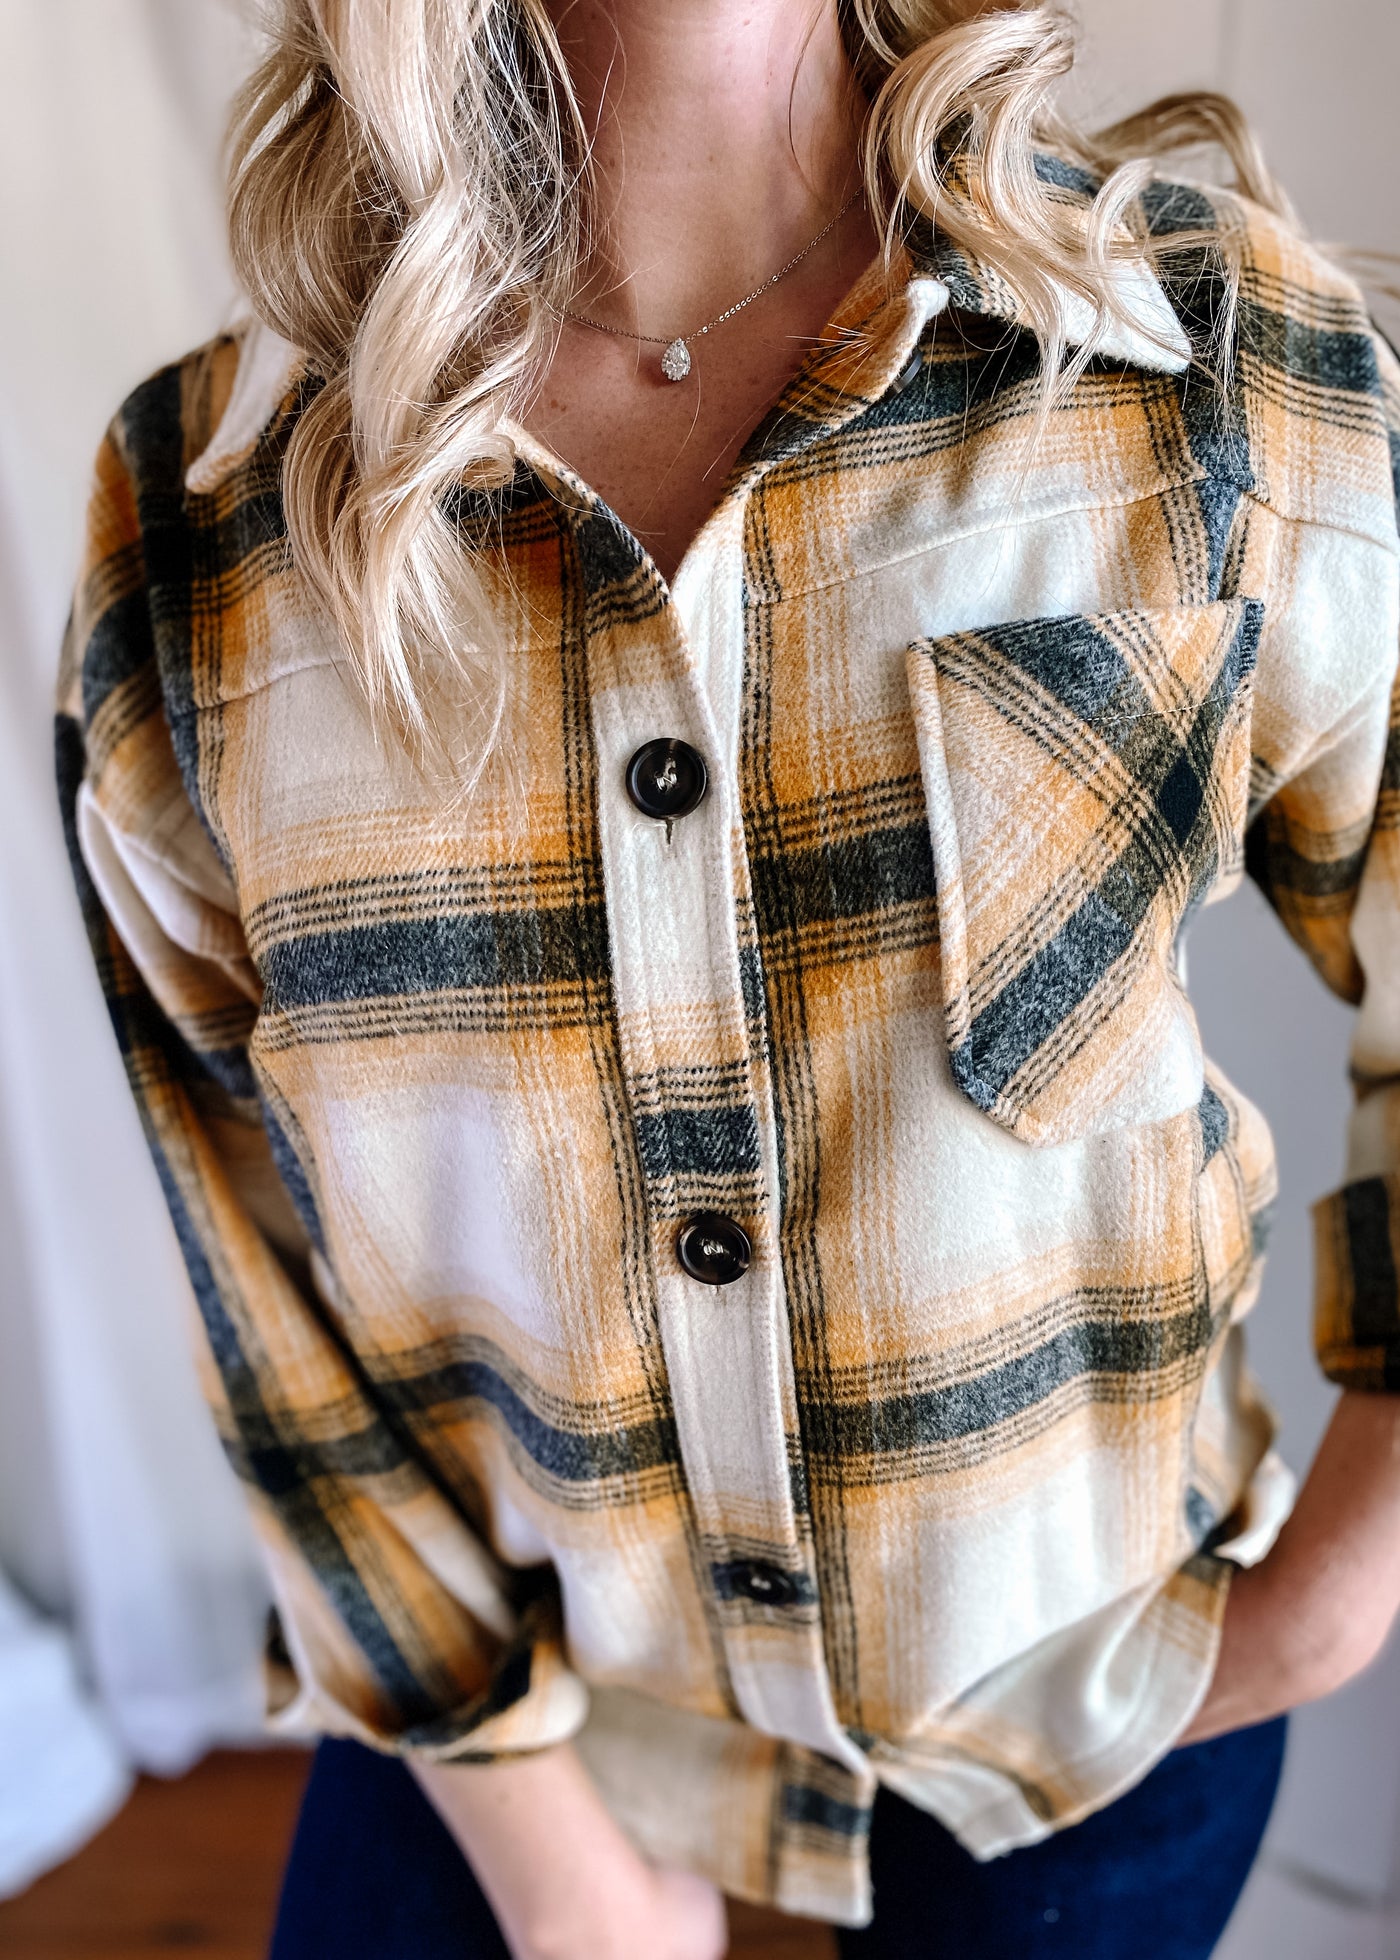 Rustic Oversized Plaid Shacket in Mustard